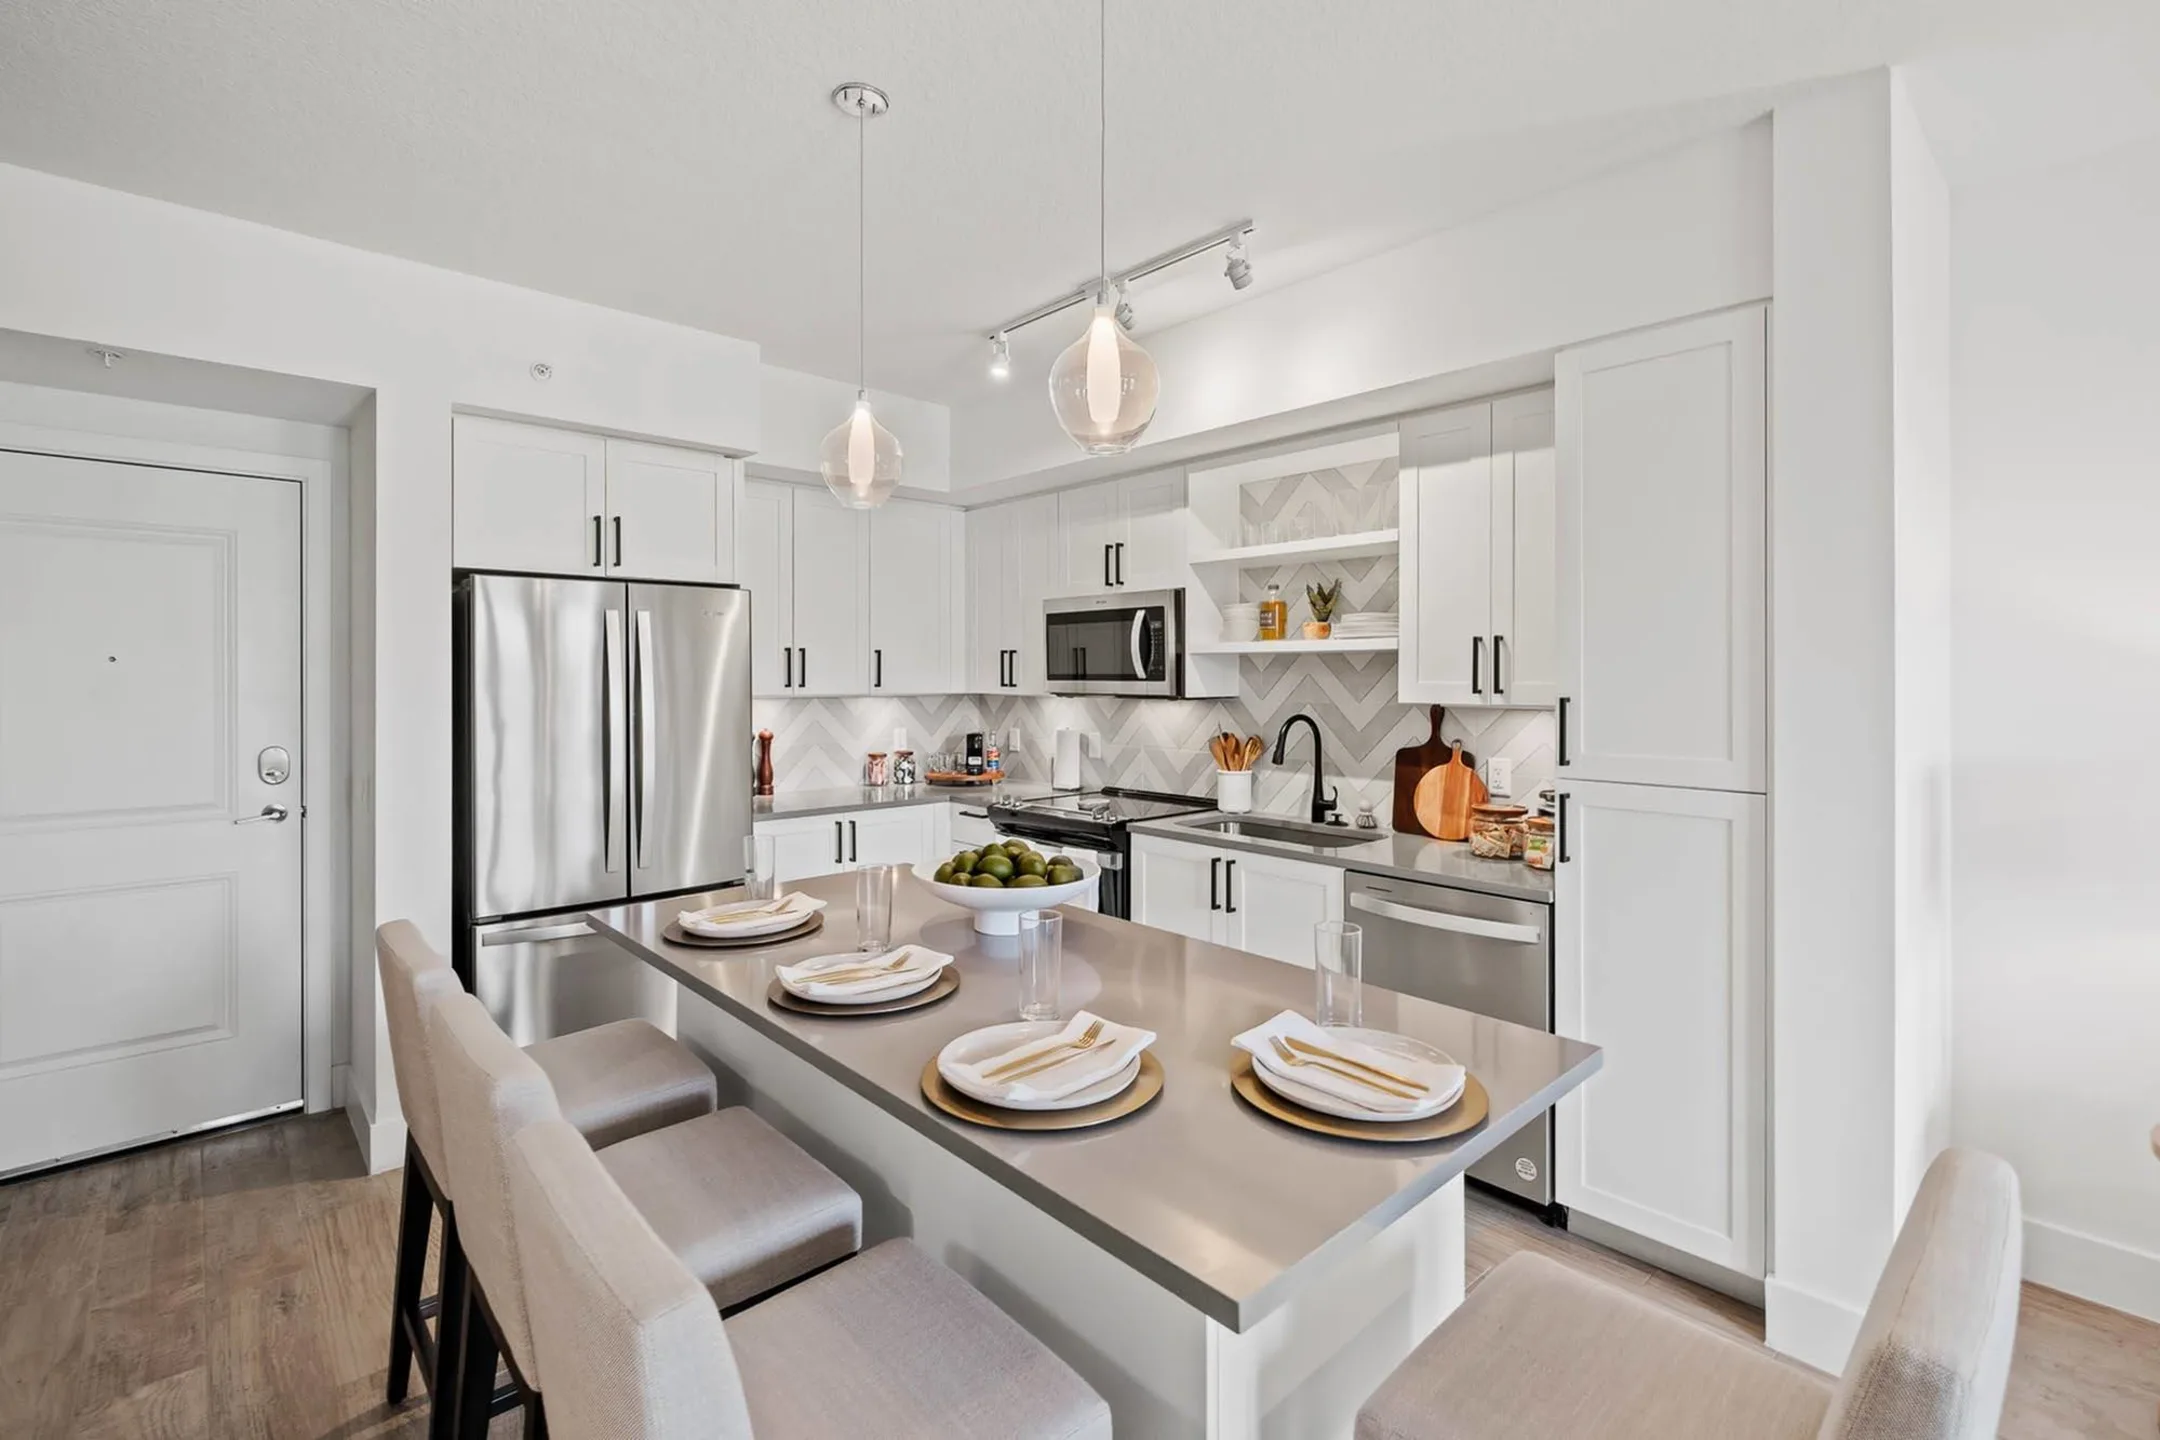 Kitchen - The Residences at Monterra Commons - 55+ Active Adult Community - Pembroke Pines, FL